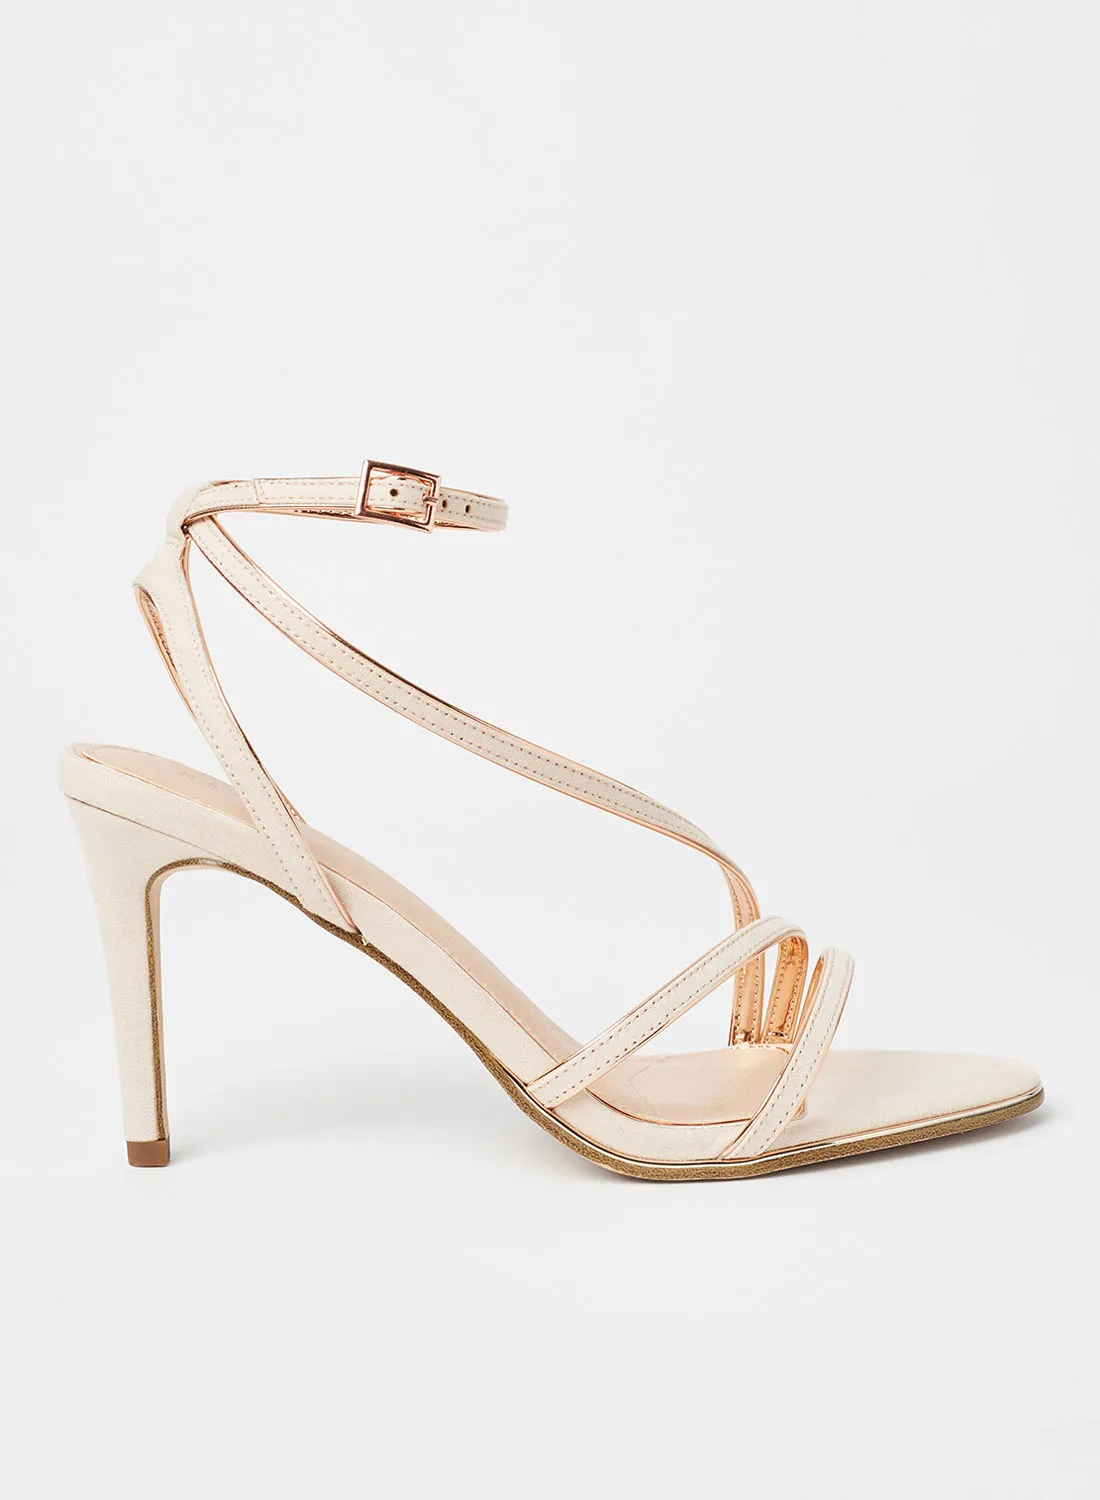 Mohito Strappy High Heel Sandals Pastel Pink